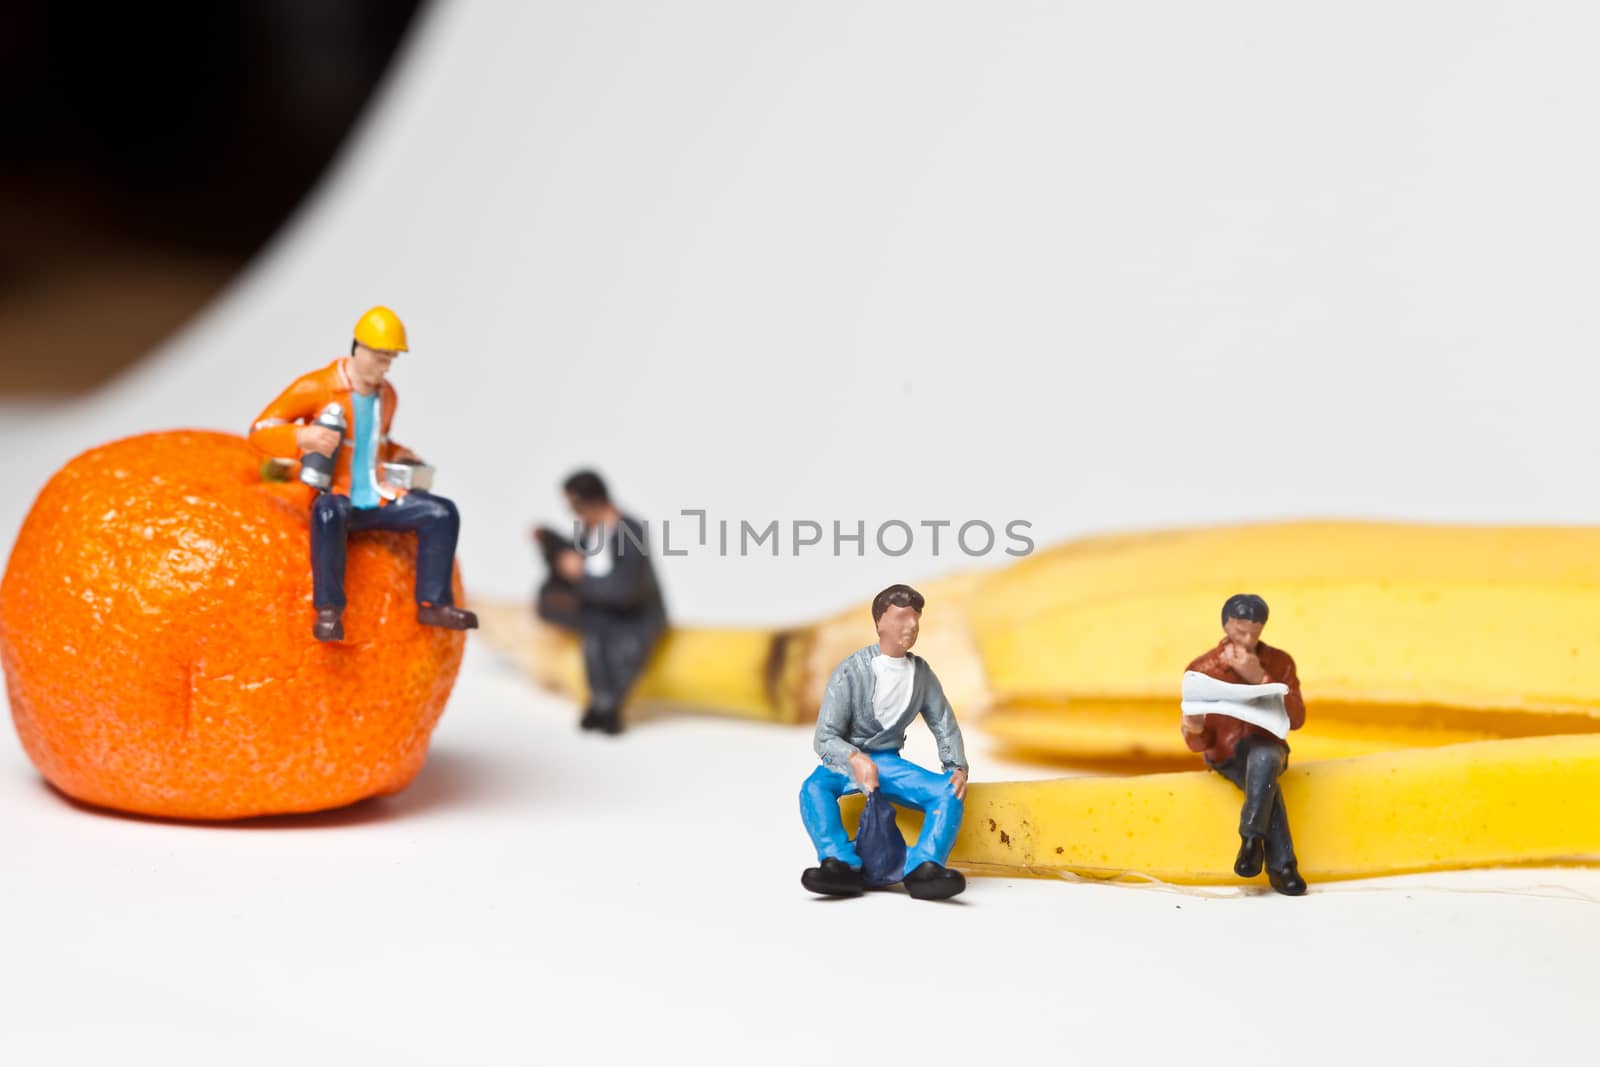 Miniature people in action in various situations